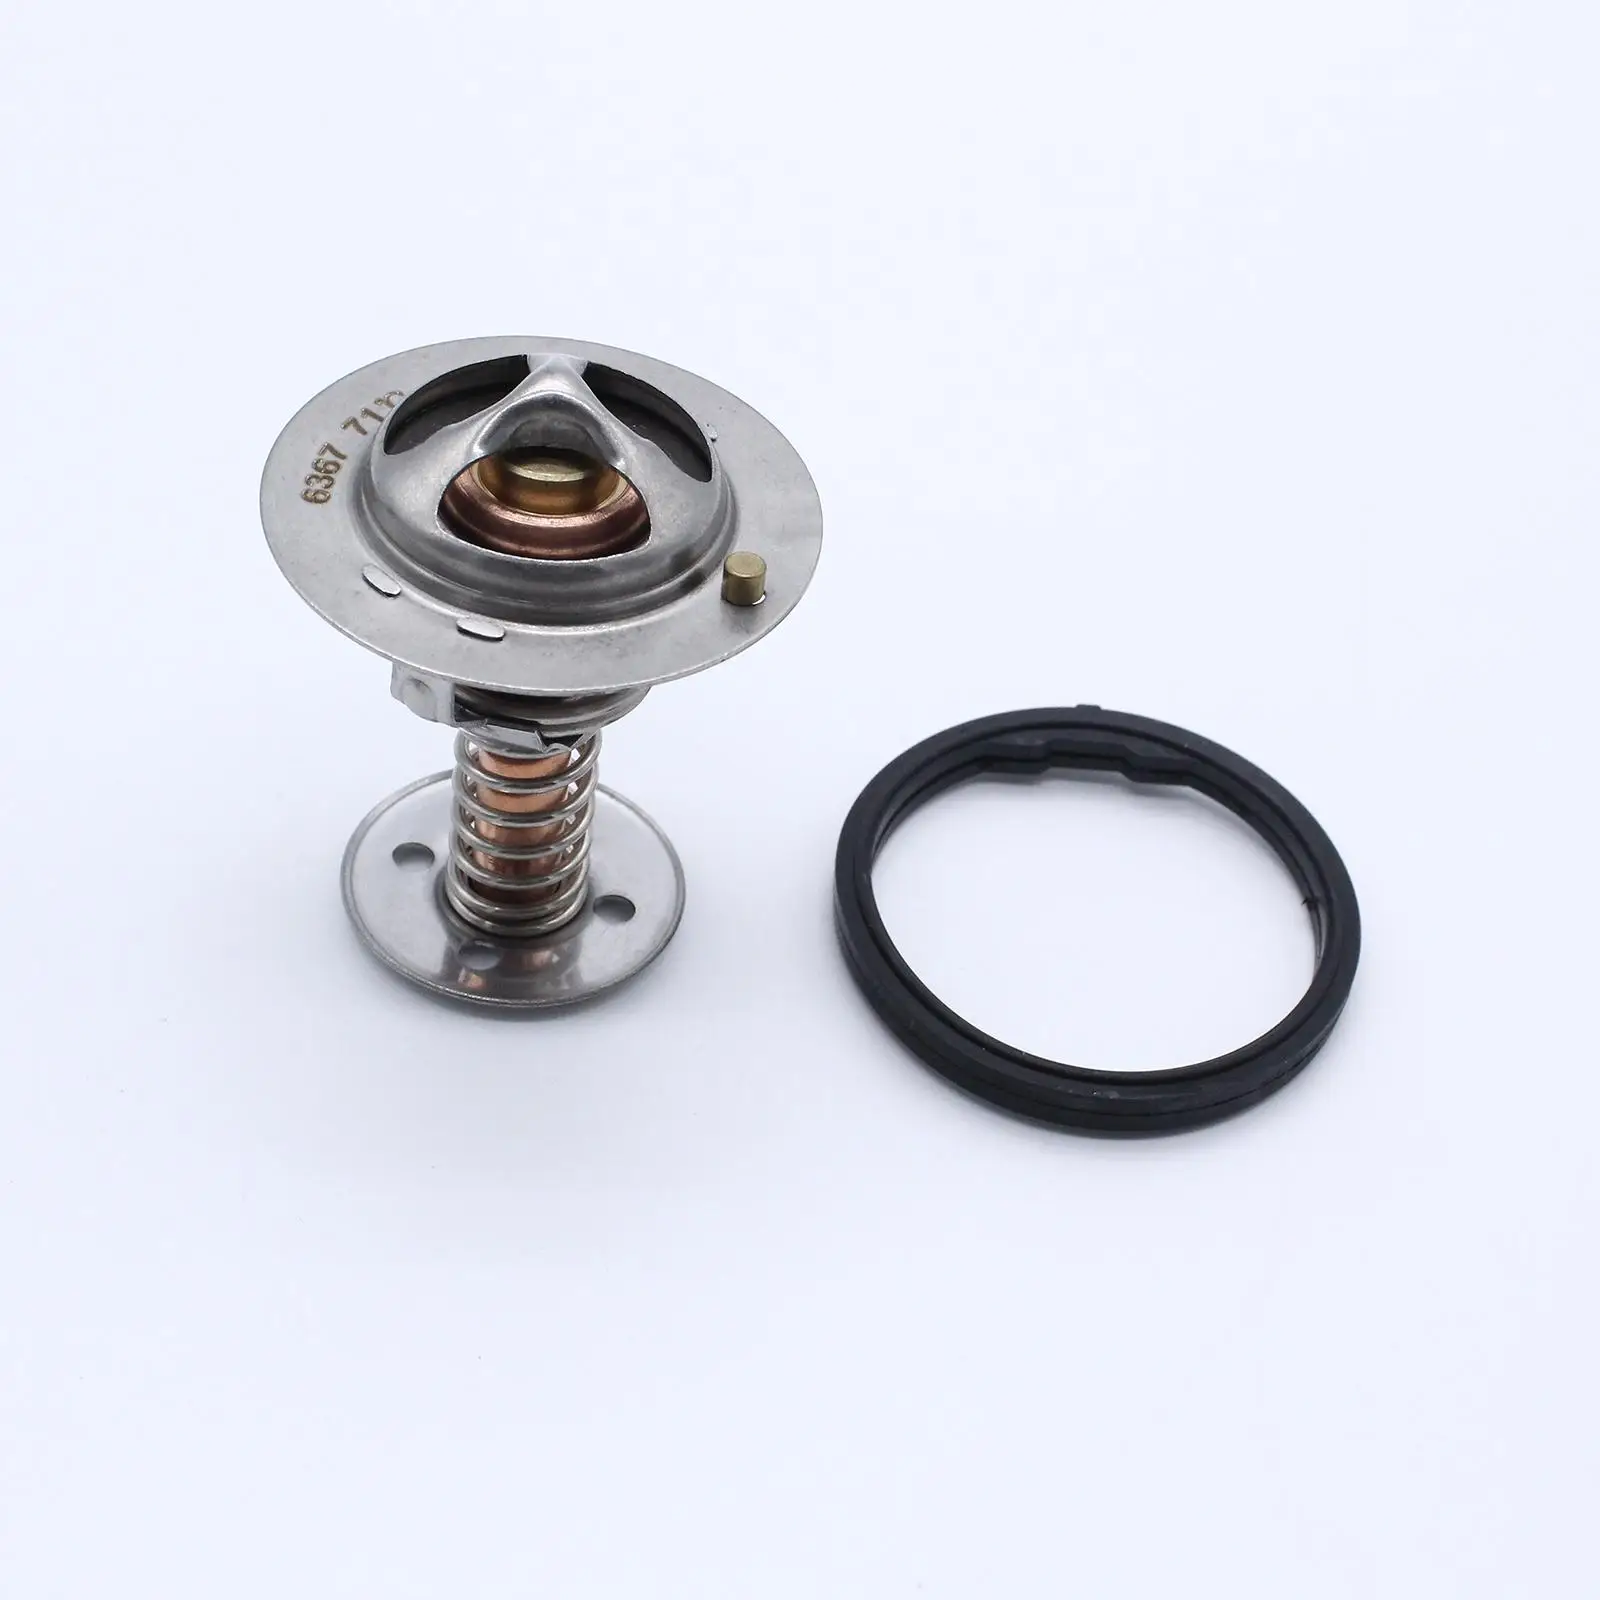 45° Swivel Water Neck Housing & Thermostat Fit for V8 (Ls-Based)